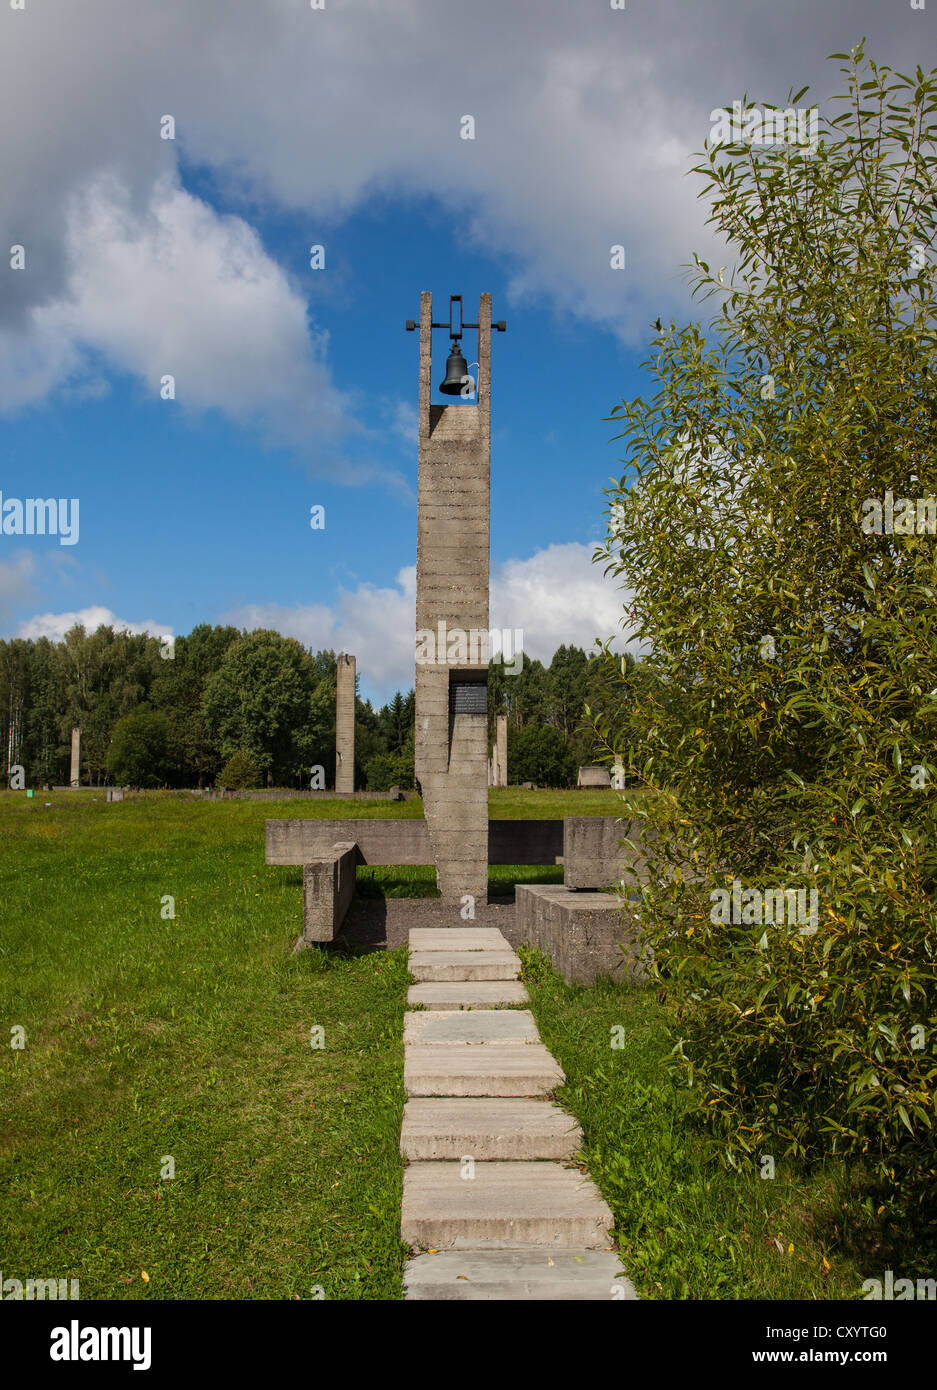 Bell tower at the Khatyn Memorial, built to remember the Belarussian fallen of the Great Patriotic War. Stock Photo